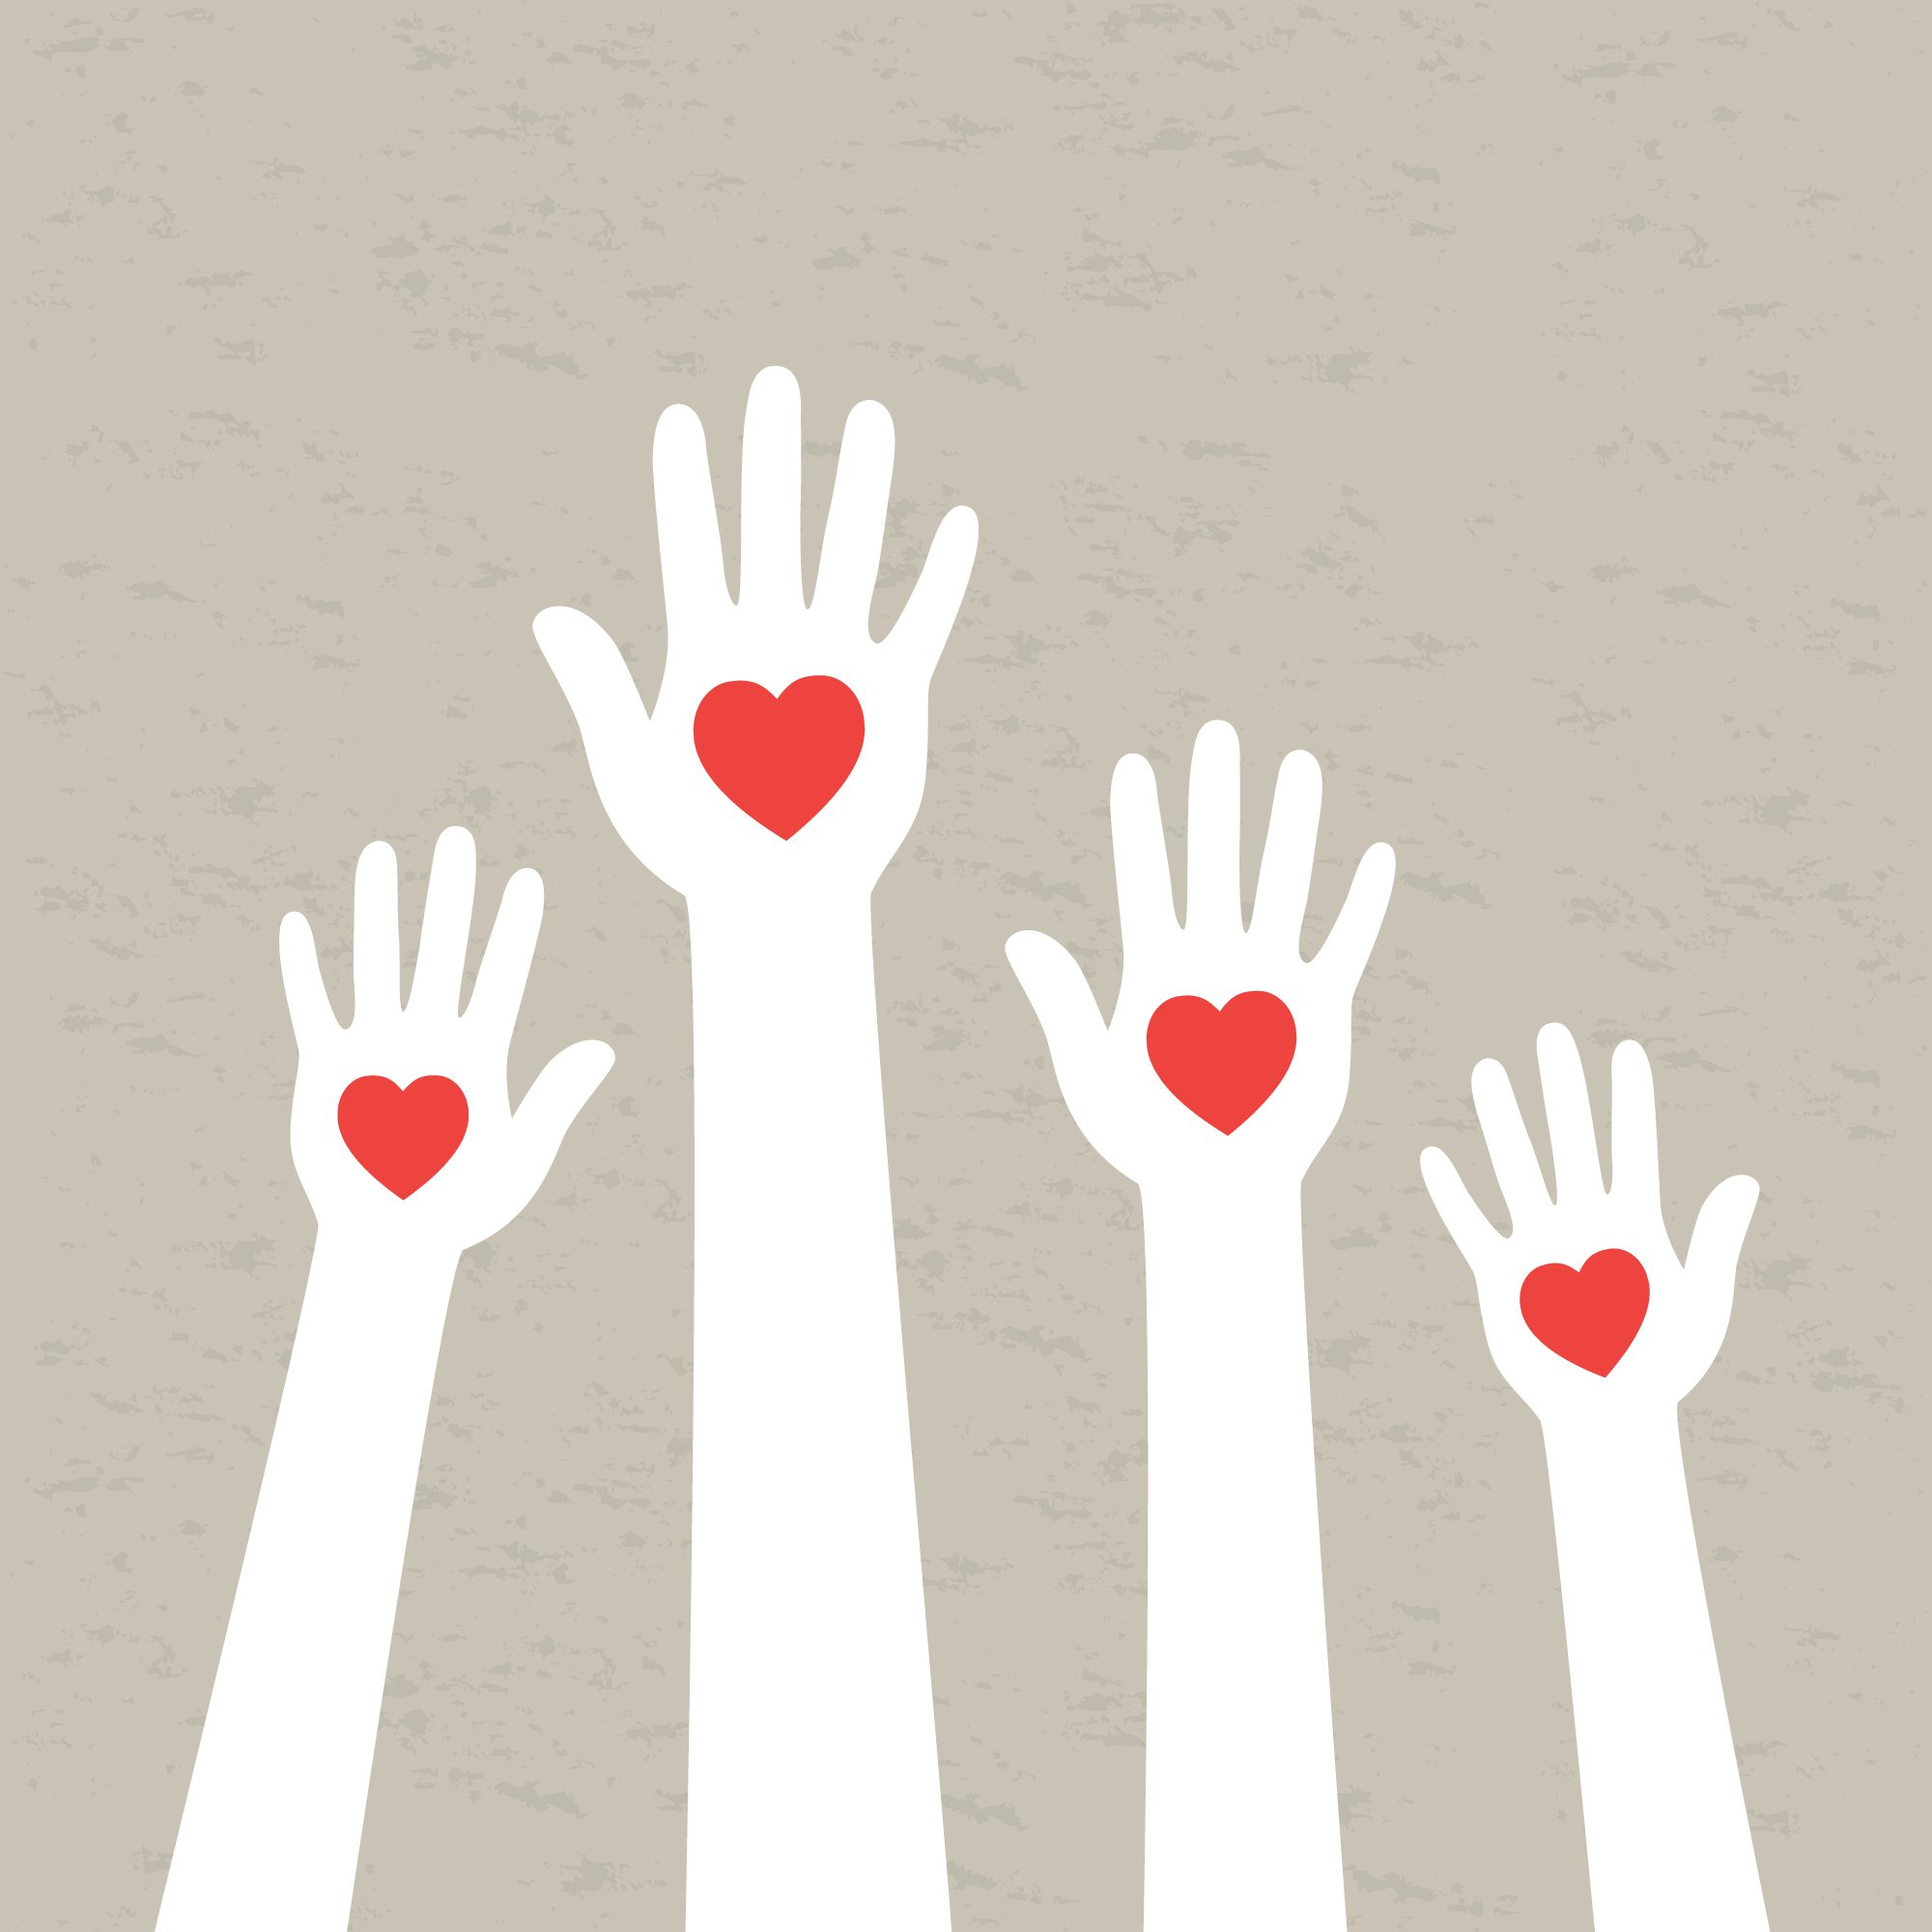 hands with hearts indicating self-care for caregivers